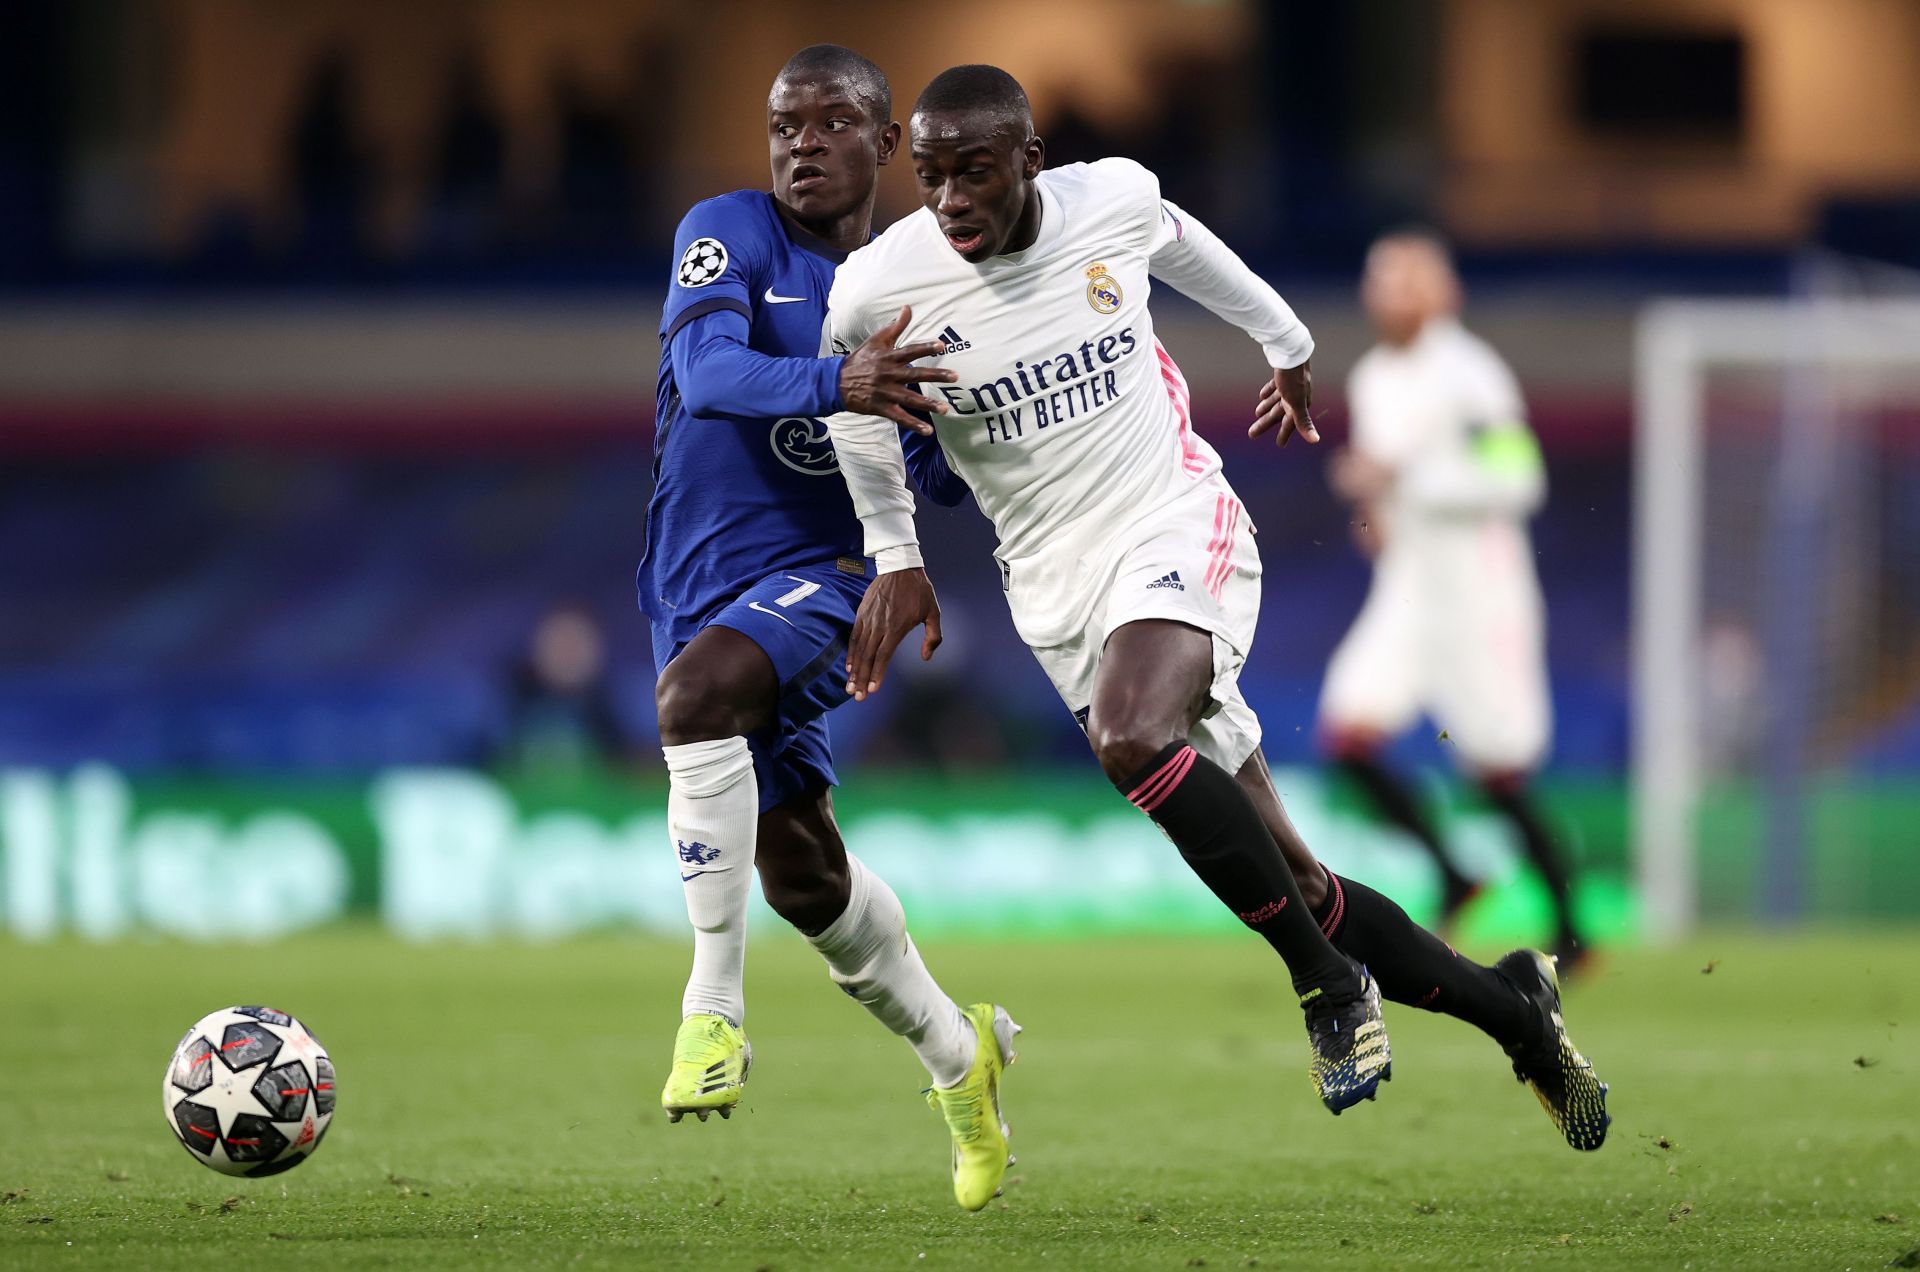 Ferland Mendy (left)&rsquo;s time at Real Madrid could be coming to an end.